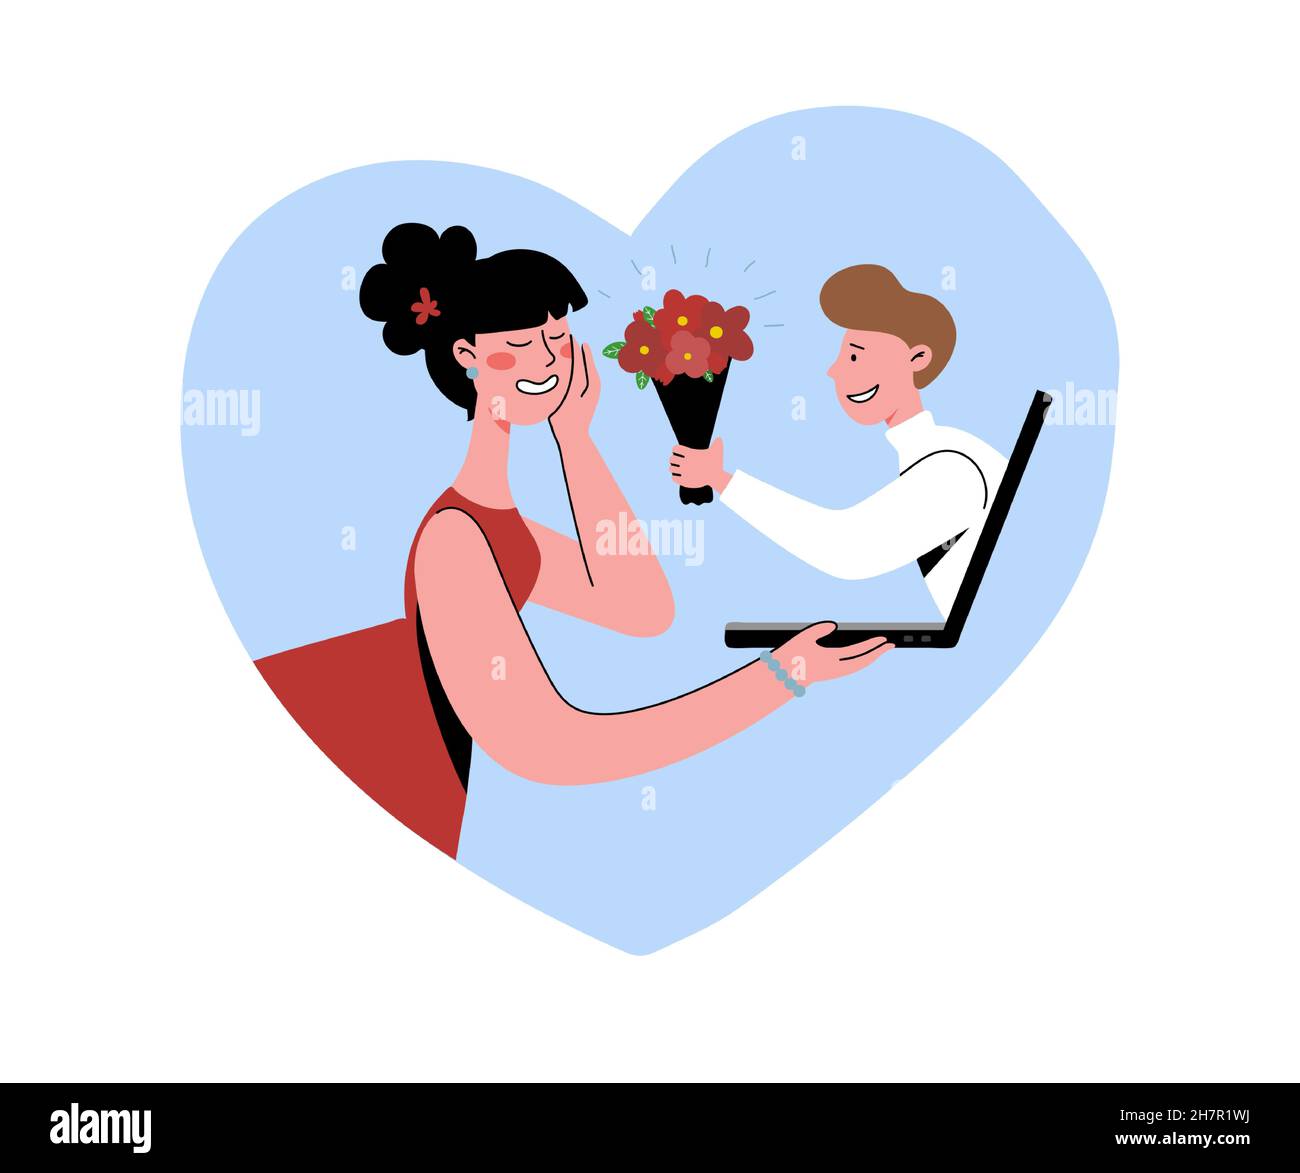 A man confesses his love to a woman. Dating site, two single people found true love through the Internet.  Vector flat illustration. Stock Vector